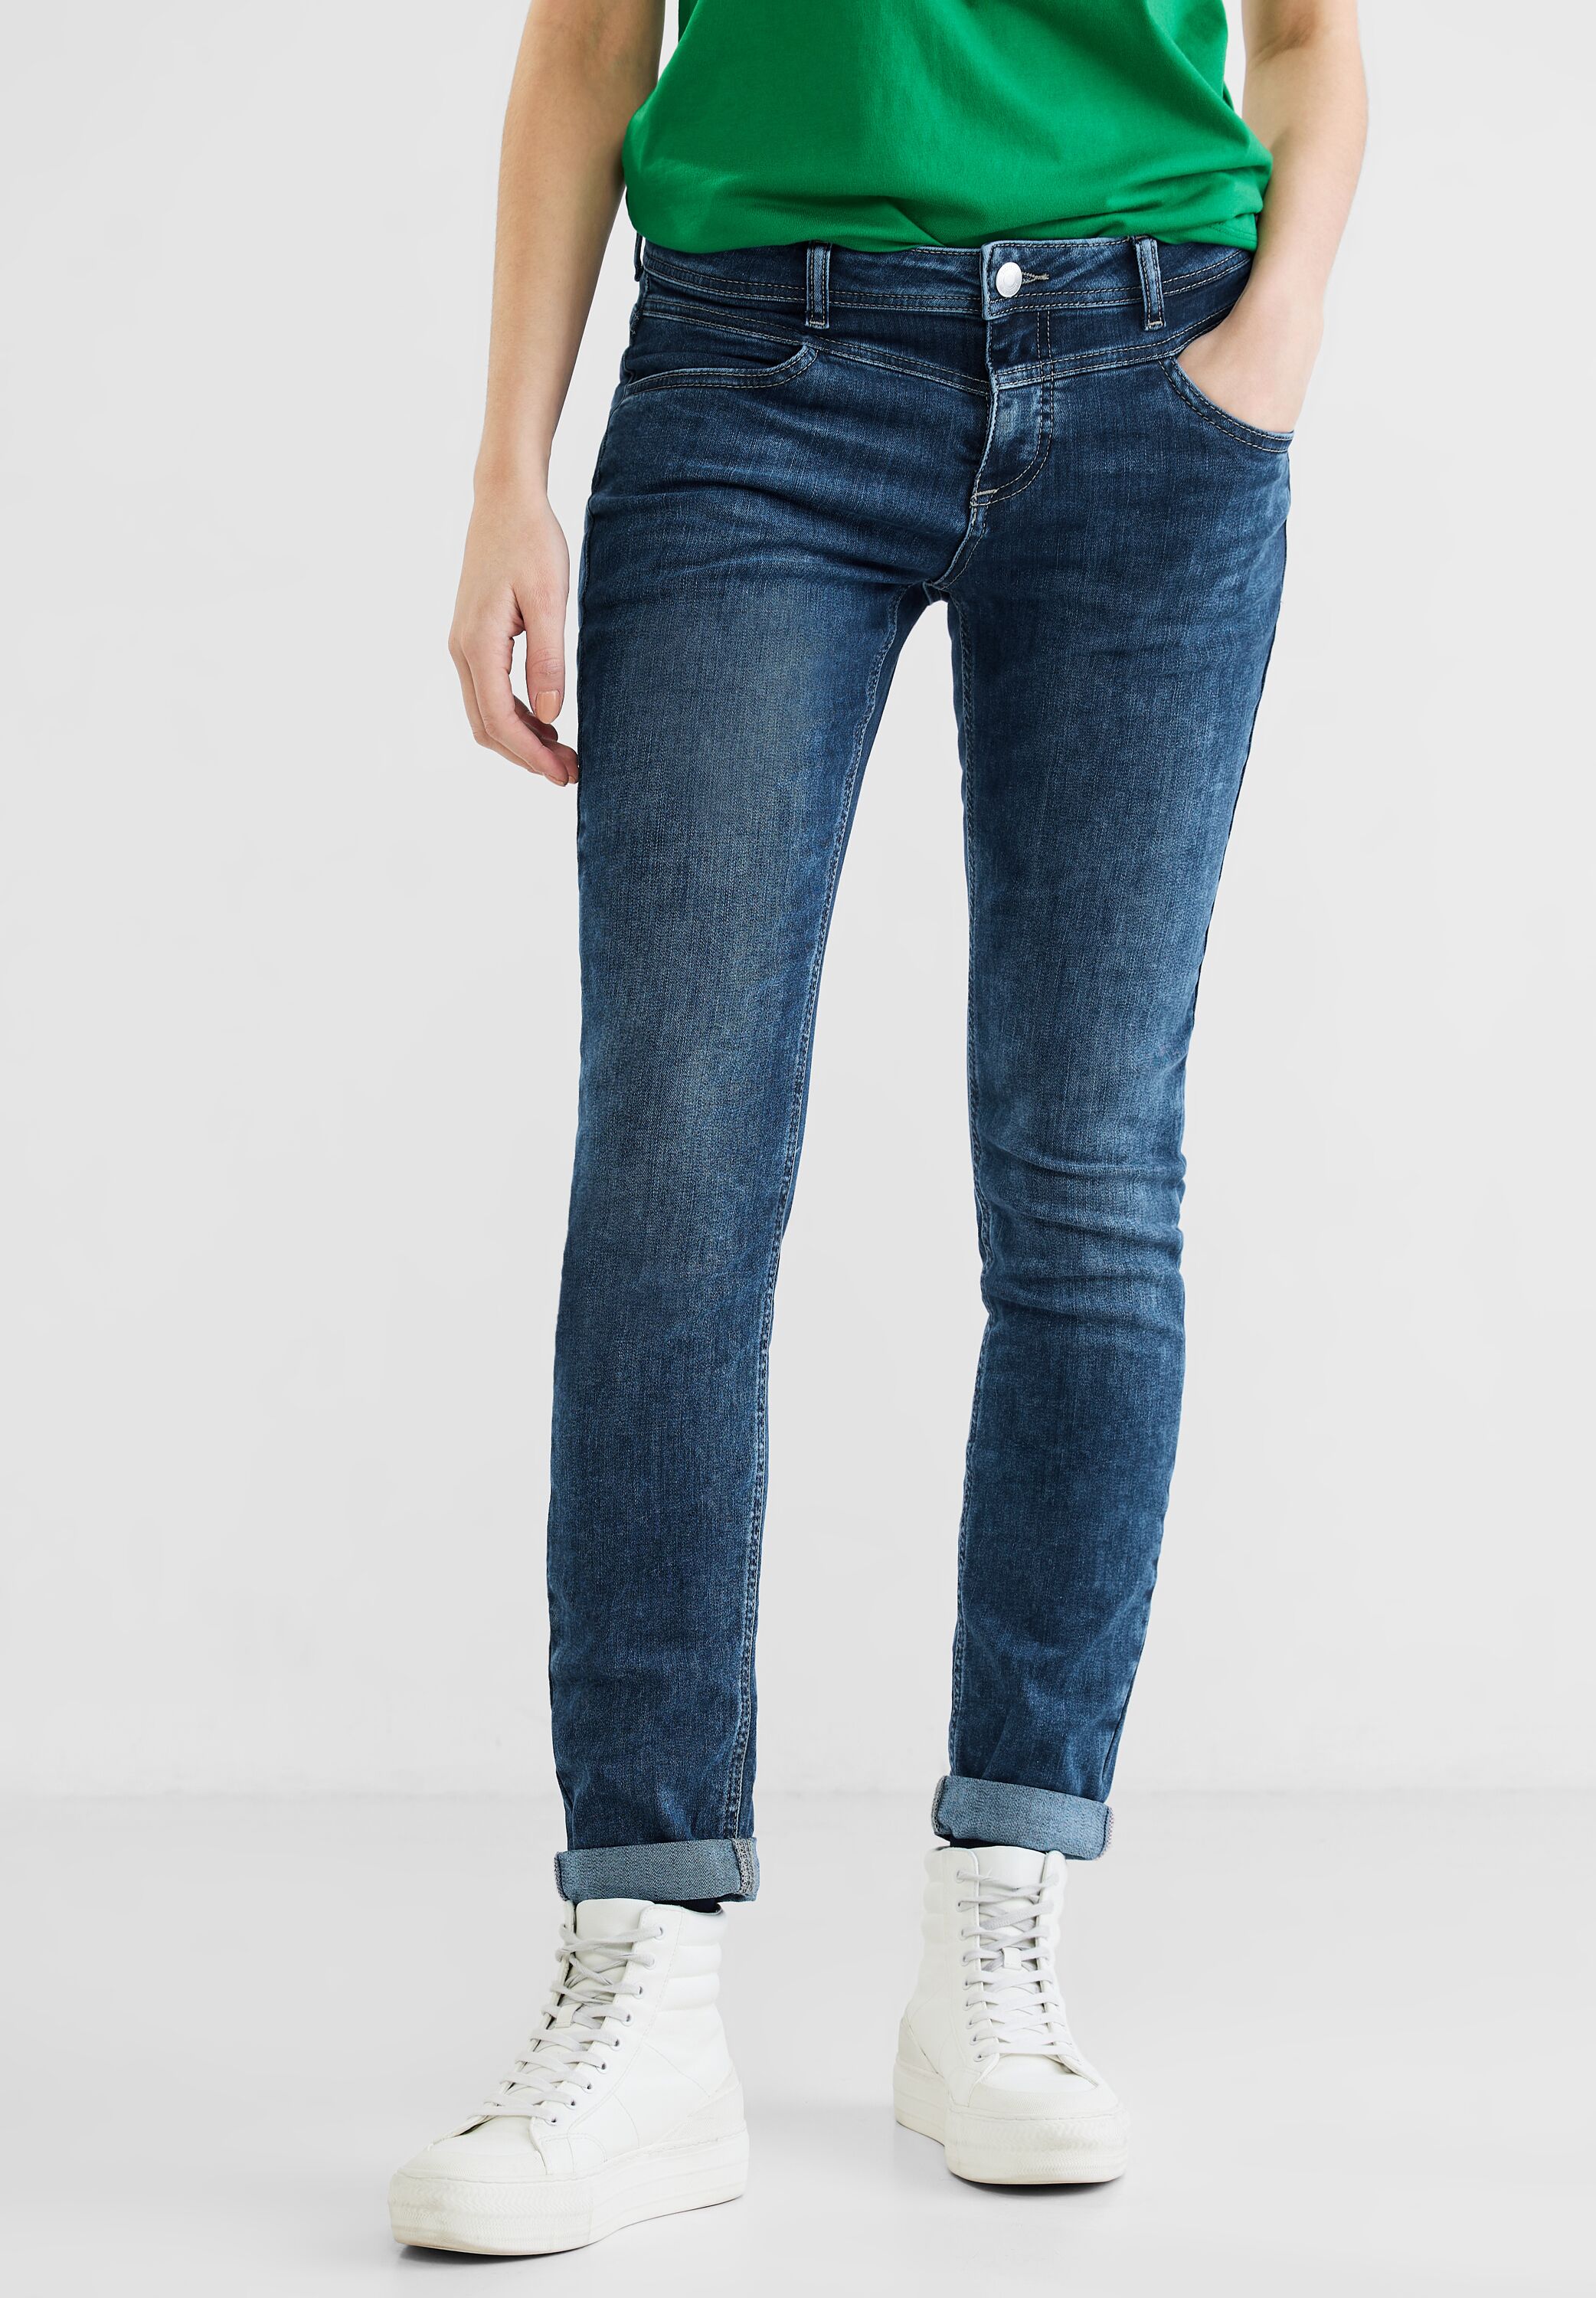 Street One Used - CONCEPT Mode Jane in A376060-14821-32 Indigo Wash Deep Jeans